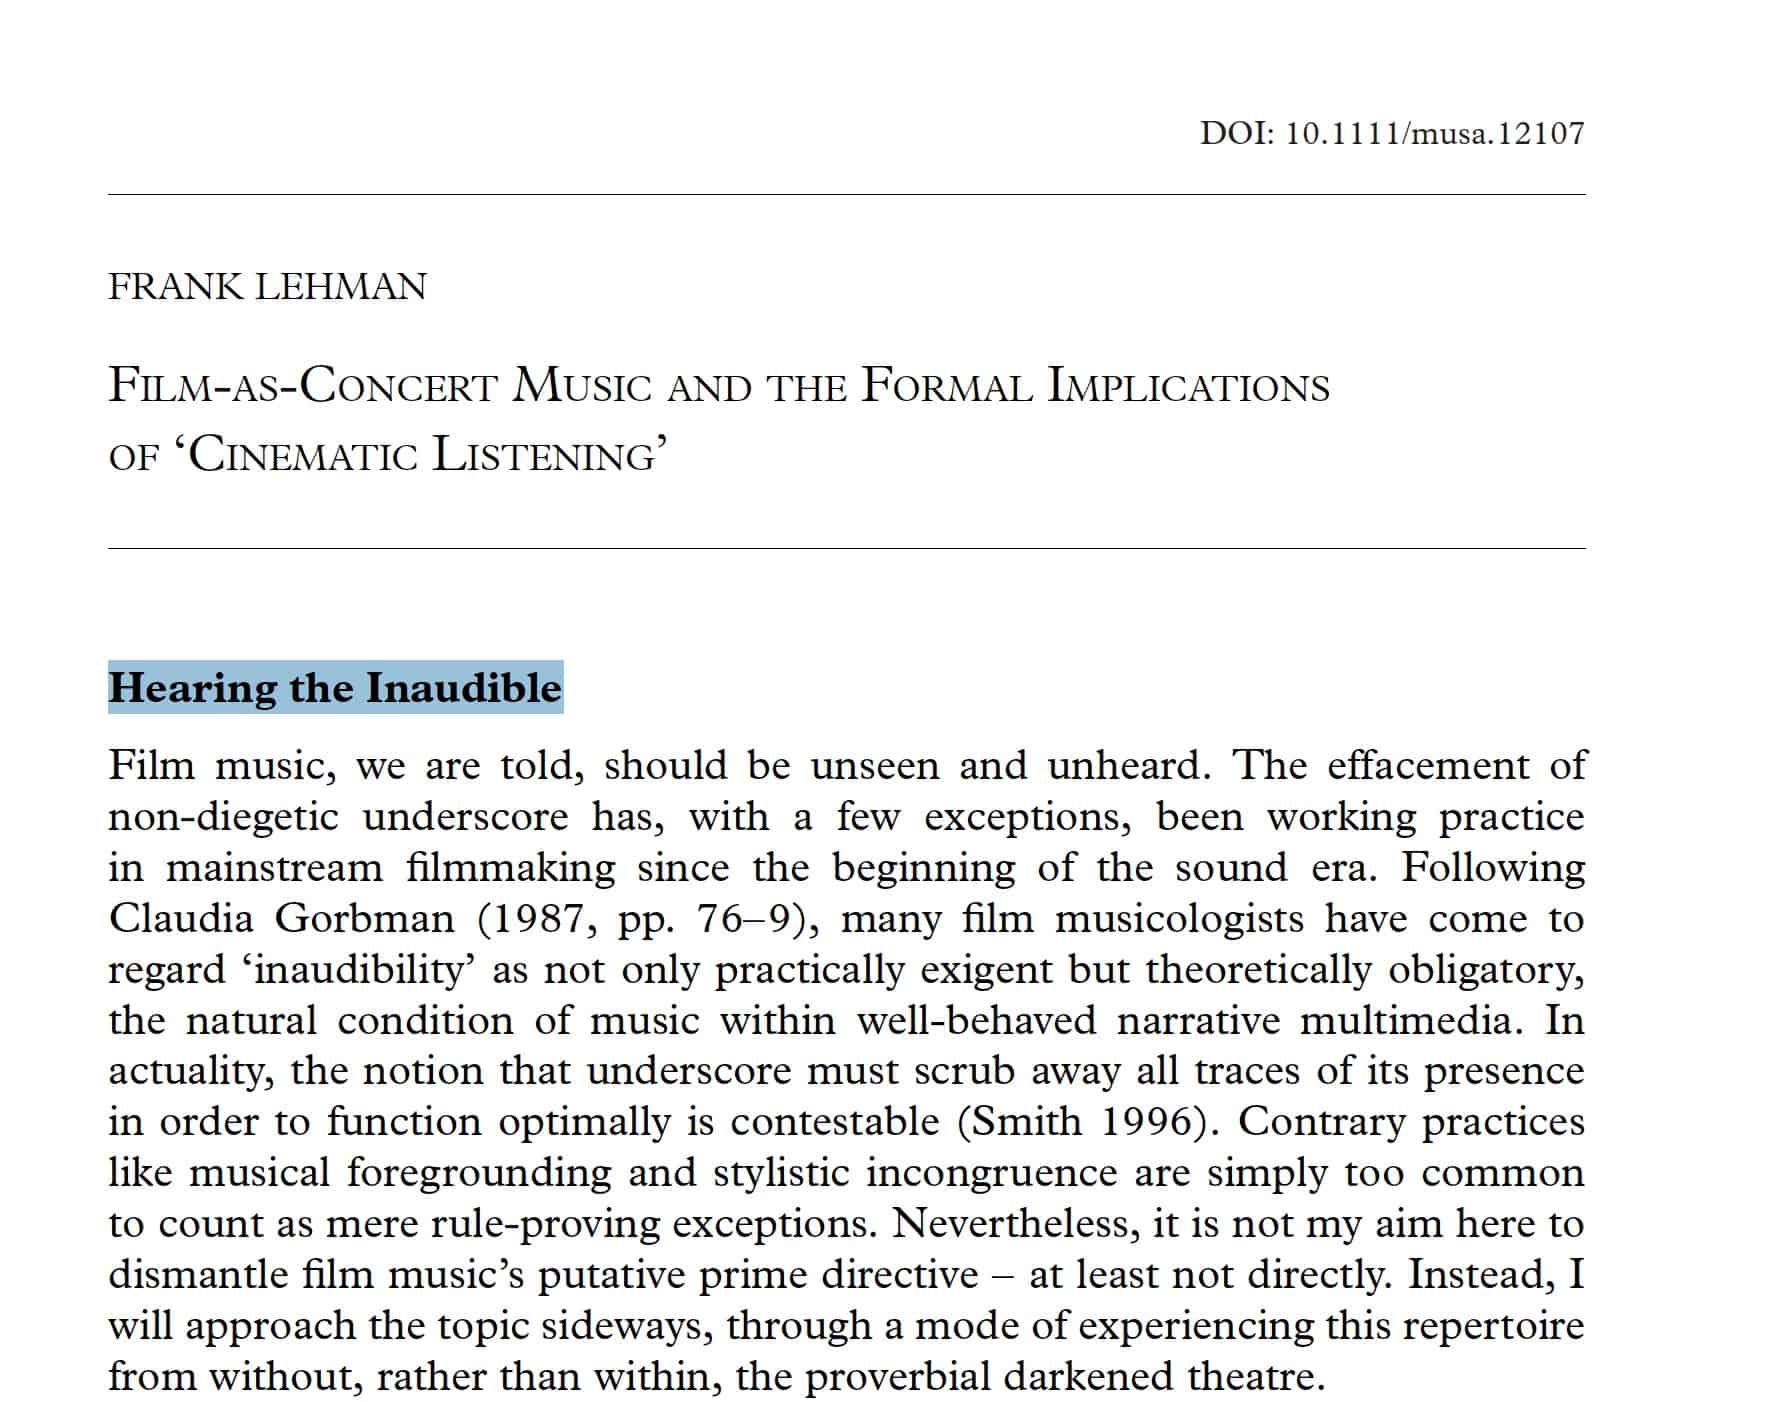 Film as Concert Music and the Formal Implications of ‘Cinematic Listening’ by Frank Lehman